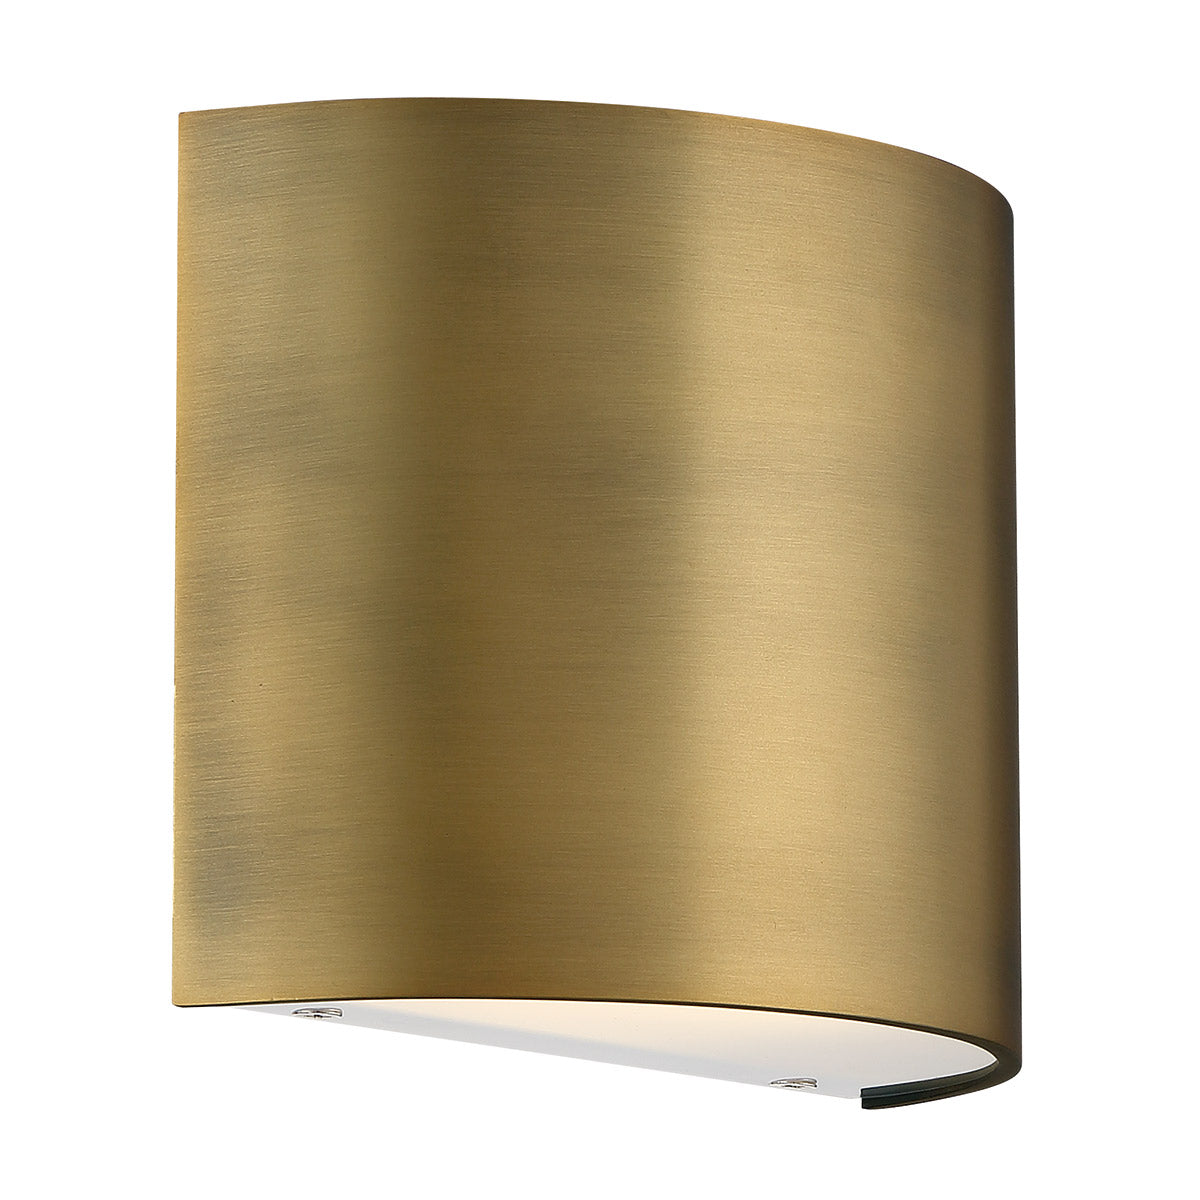 W.A.C. Canada - LED Wall Sconce - Pocket - Aged Brass- Union Lighting Luminaires Decor